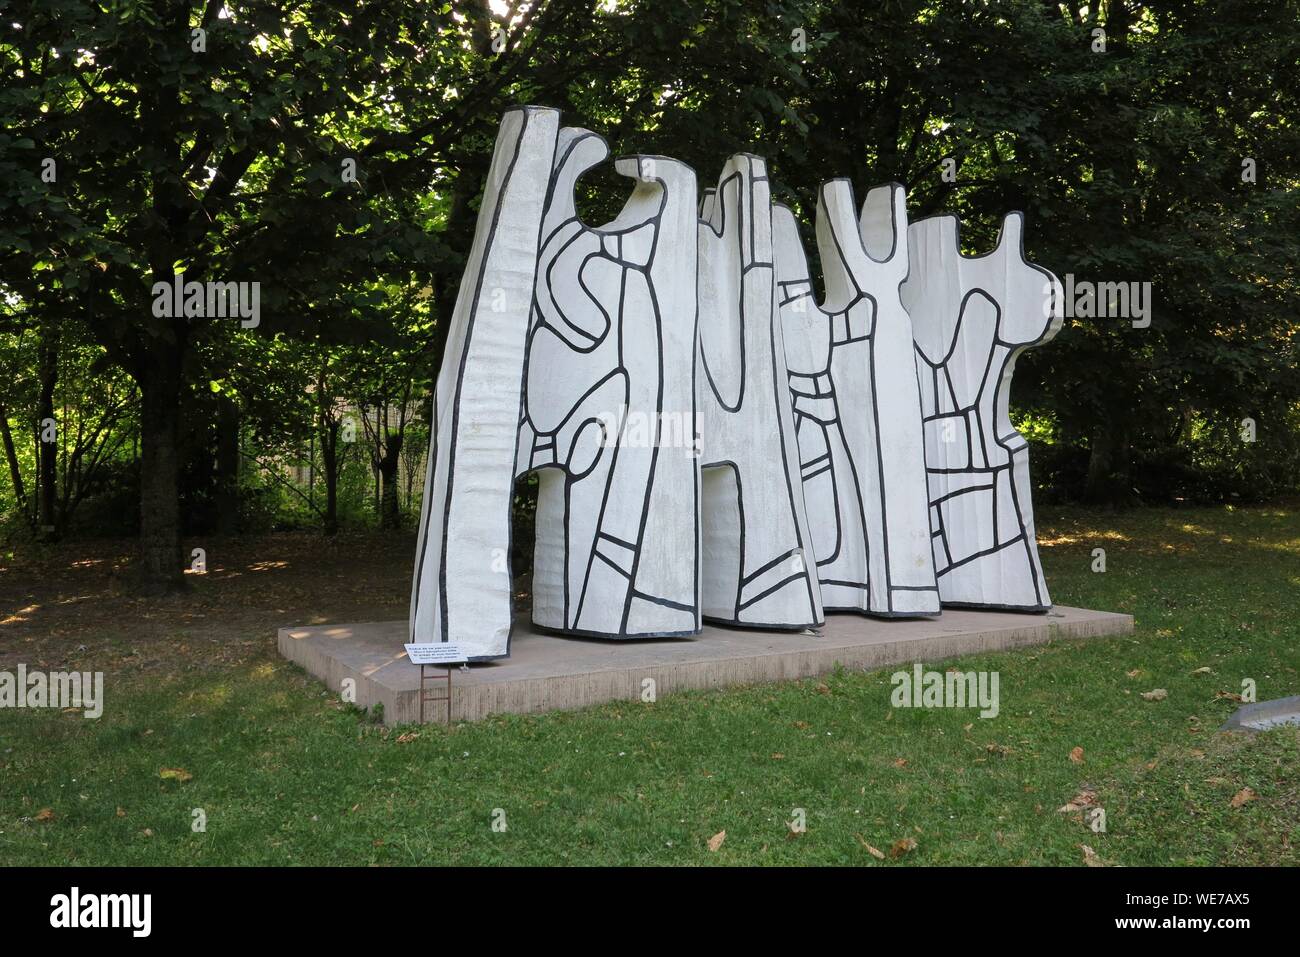 Switzerland, Valais Canton, City of Martigny, Foundation Pierre Giannada, the park where a permanent exhibition of modern sculptures is open freely to the public Stock Photo